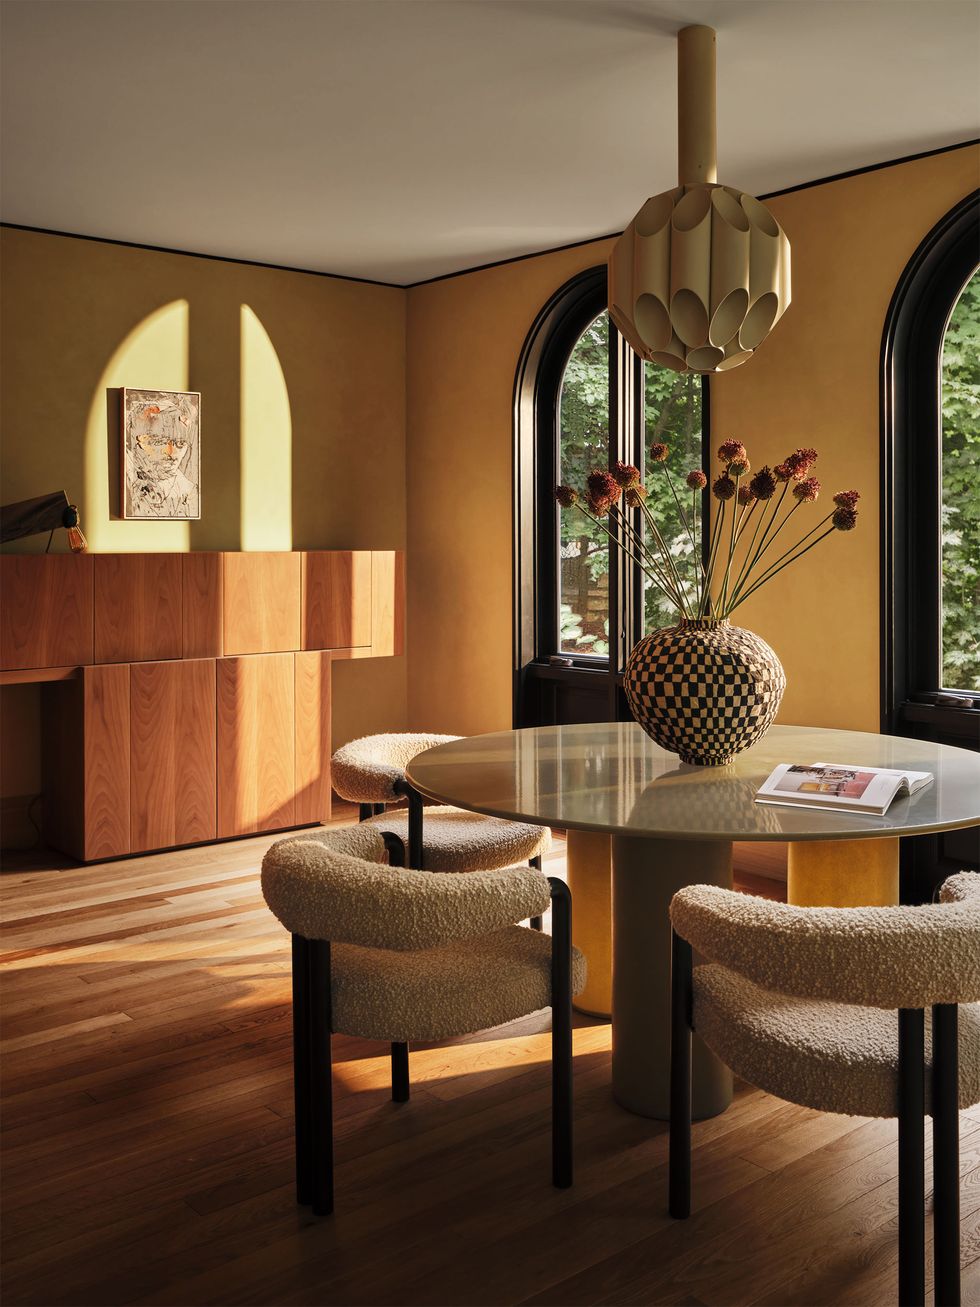 in a bar and lounge area is a wood floor, arched windows, a walnut sideboard, a round table with three boucle covered low back chairs, a multifaceted round pendant, and a checkerboard patterned vase